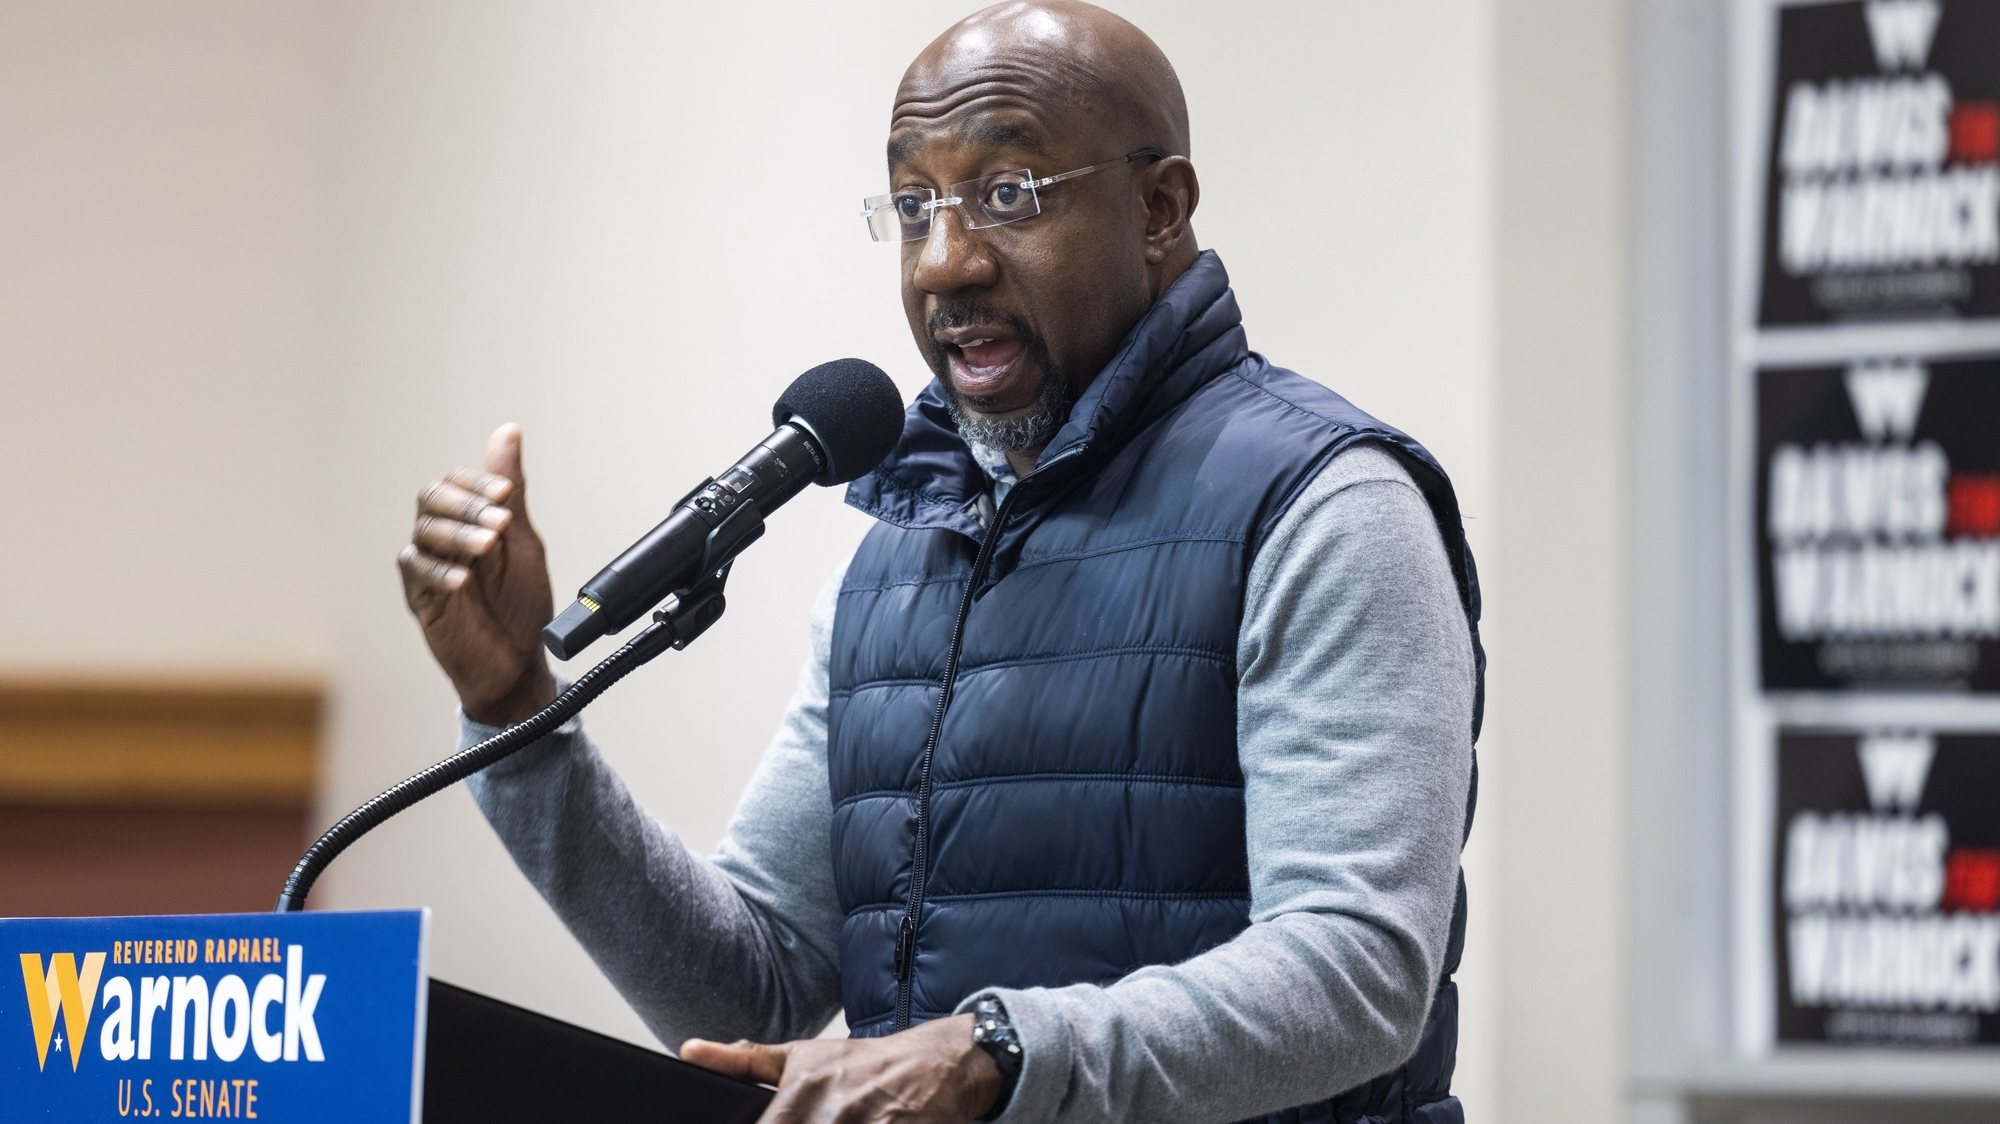 epa10348958 US Democratic Senate candidate Raphael Warnock campaigns at the University of Georgia in Athens, Georgia, USA, 04 December 2022. Warnock, a current US Senator, is in a runoff with Republican candidate Herschel Walker.  EPA/JIM LO SCALZO